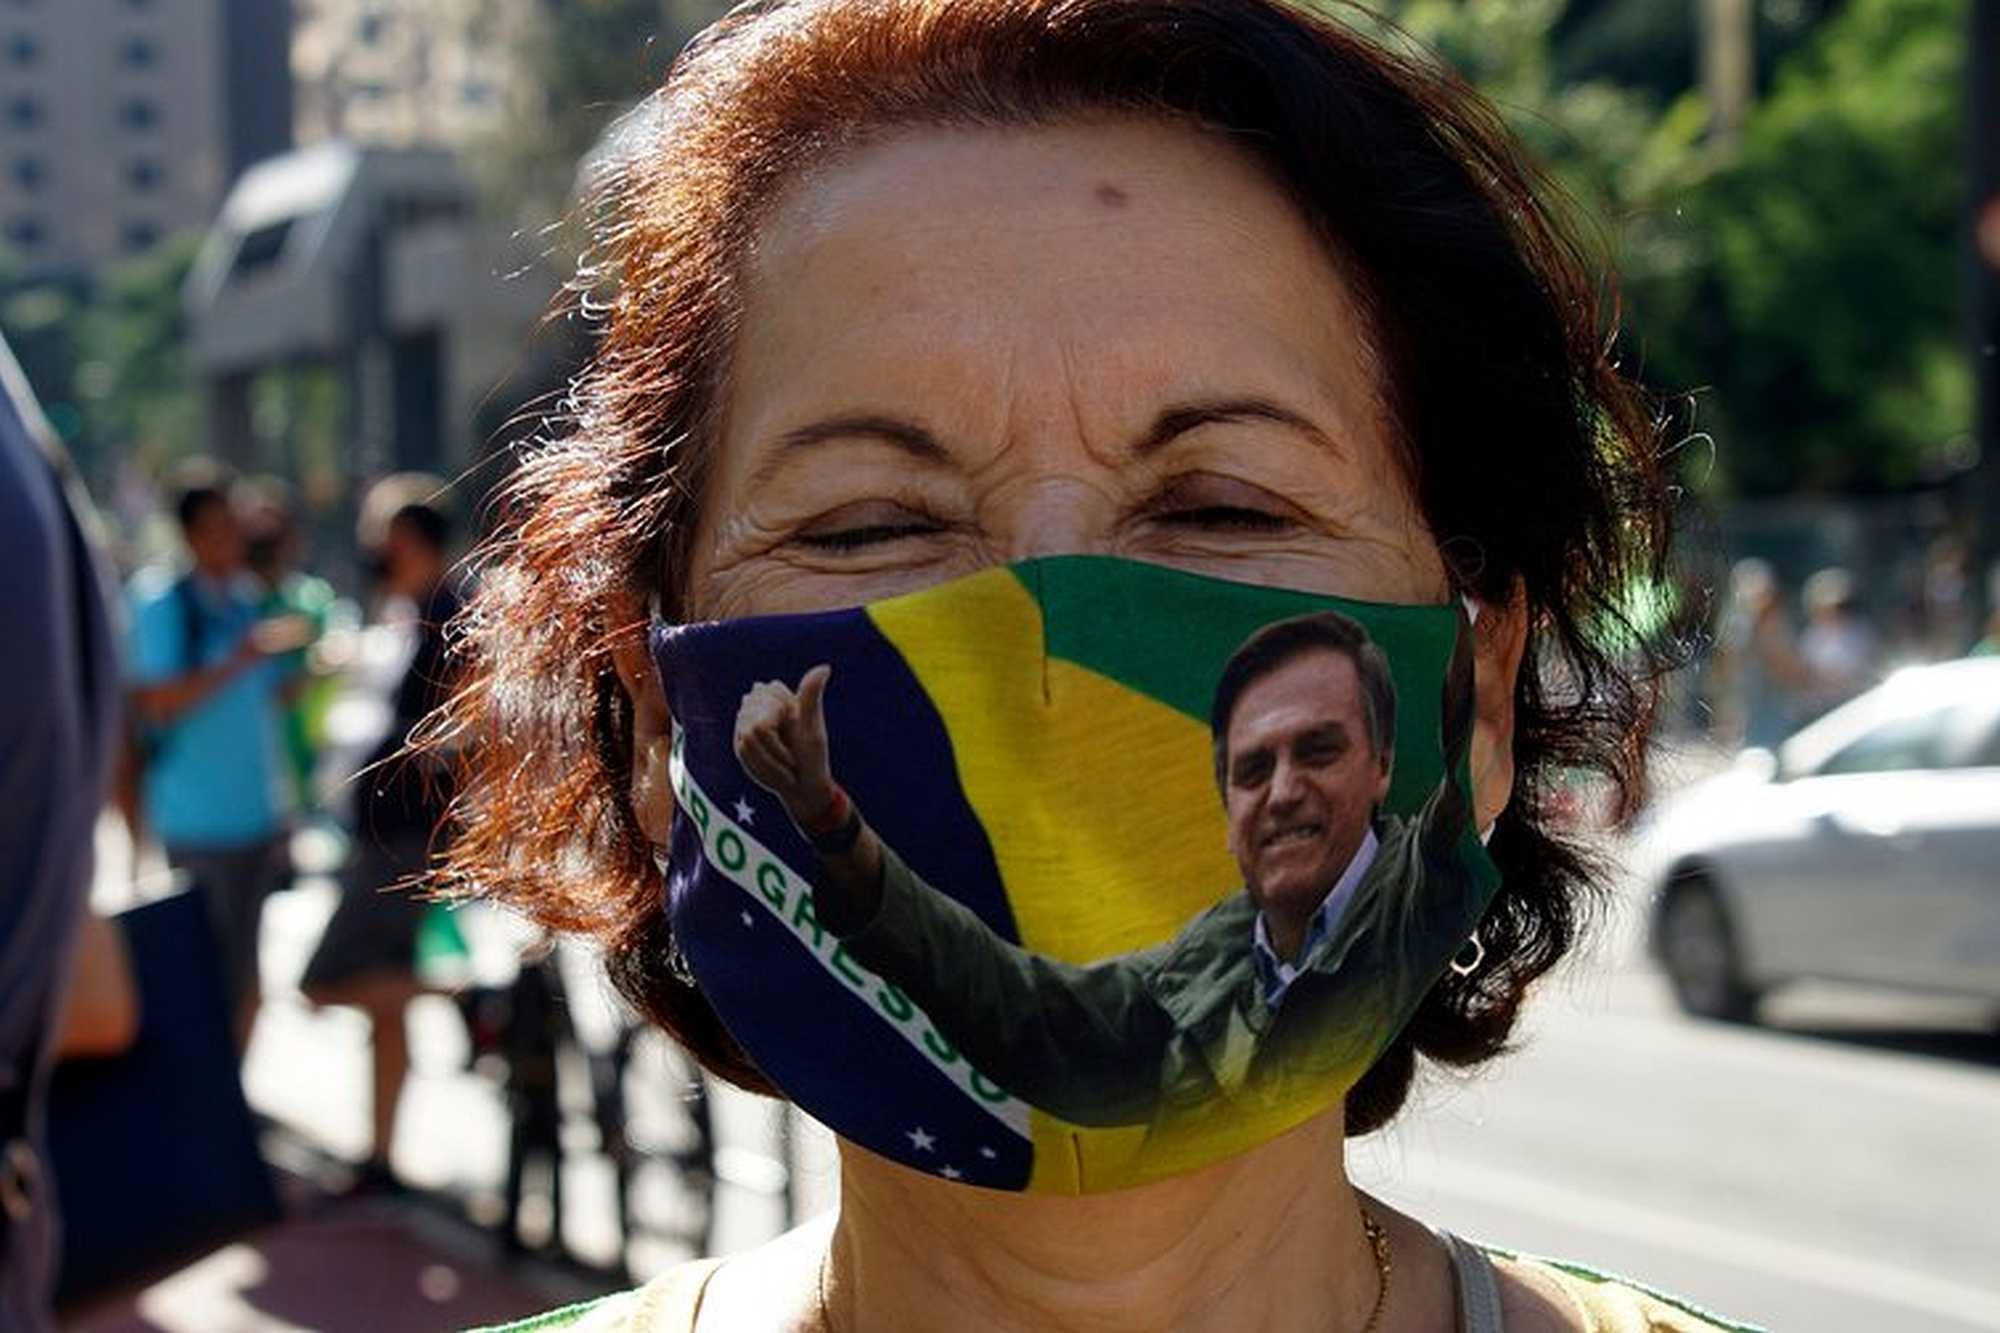 Bolsonaro's supporters took to the streets in June 2020 in support of the federal government | Szucinski/Alamy Stock Photo